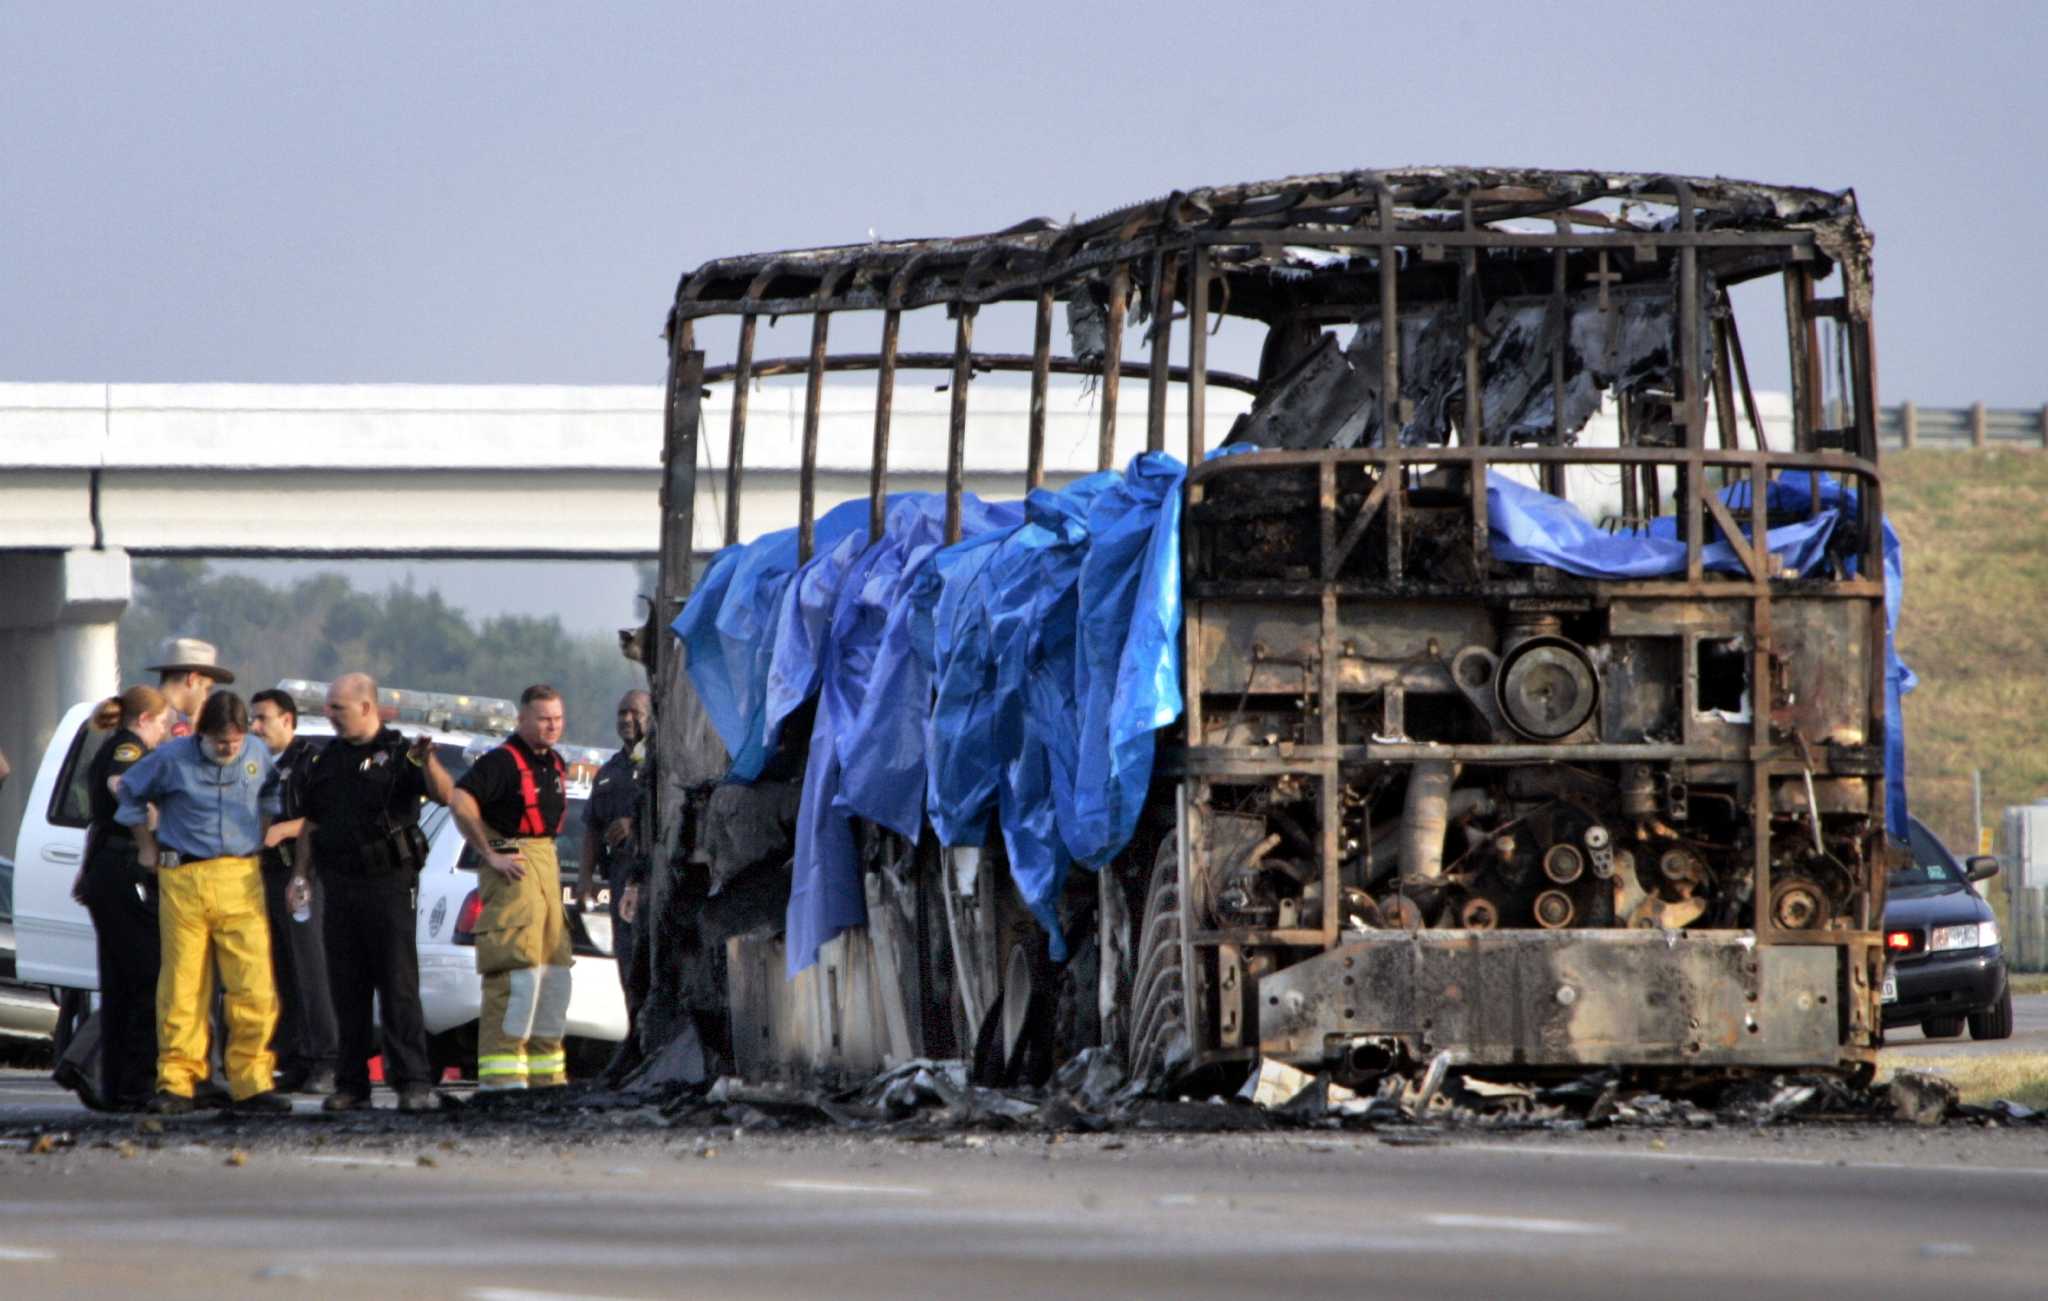 Deadly NY limo crash stark reminder of bus fire that killed 23 from Bellaire - Houston ...2048 x 1301